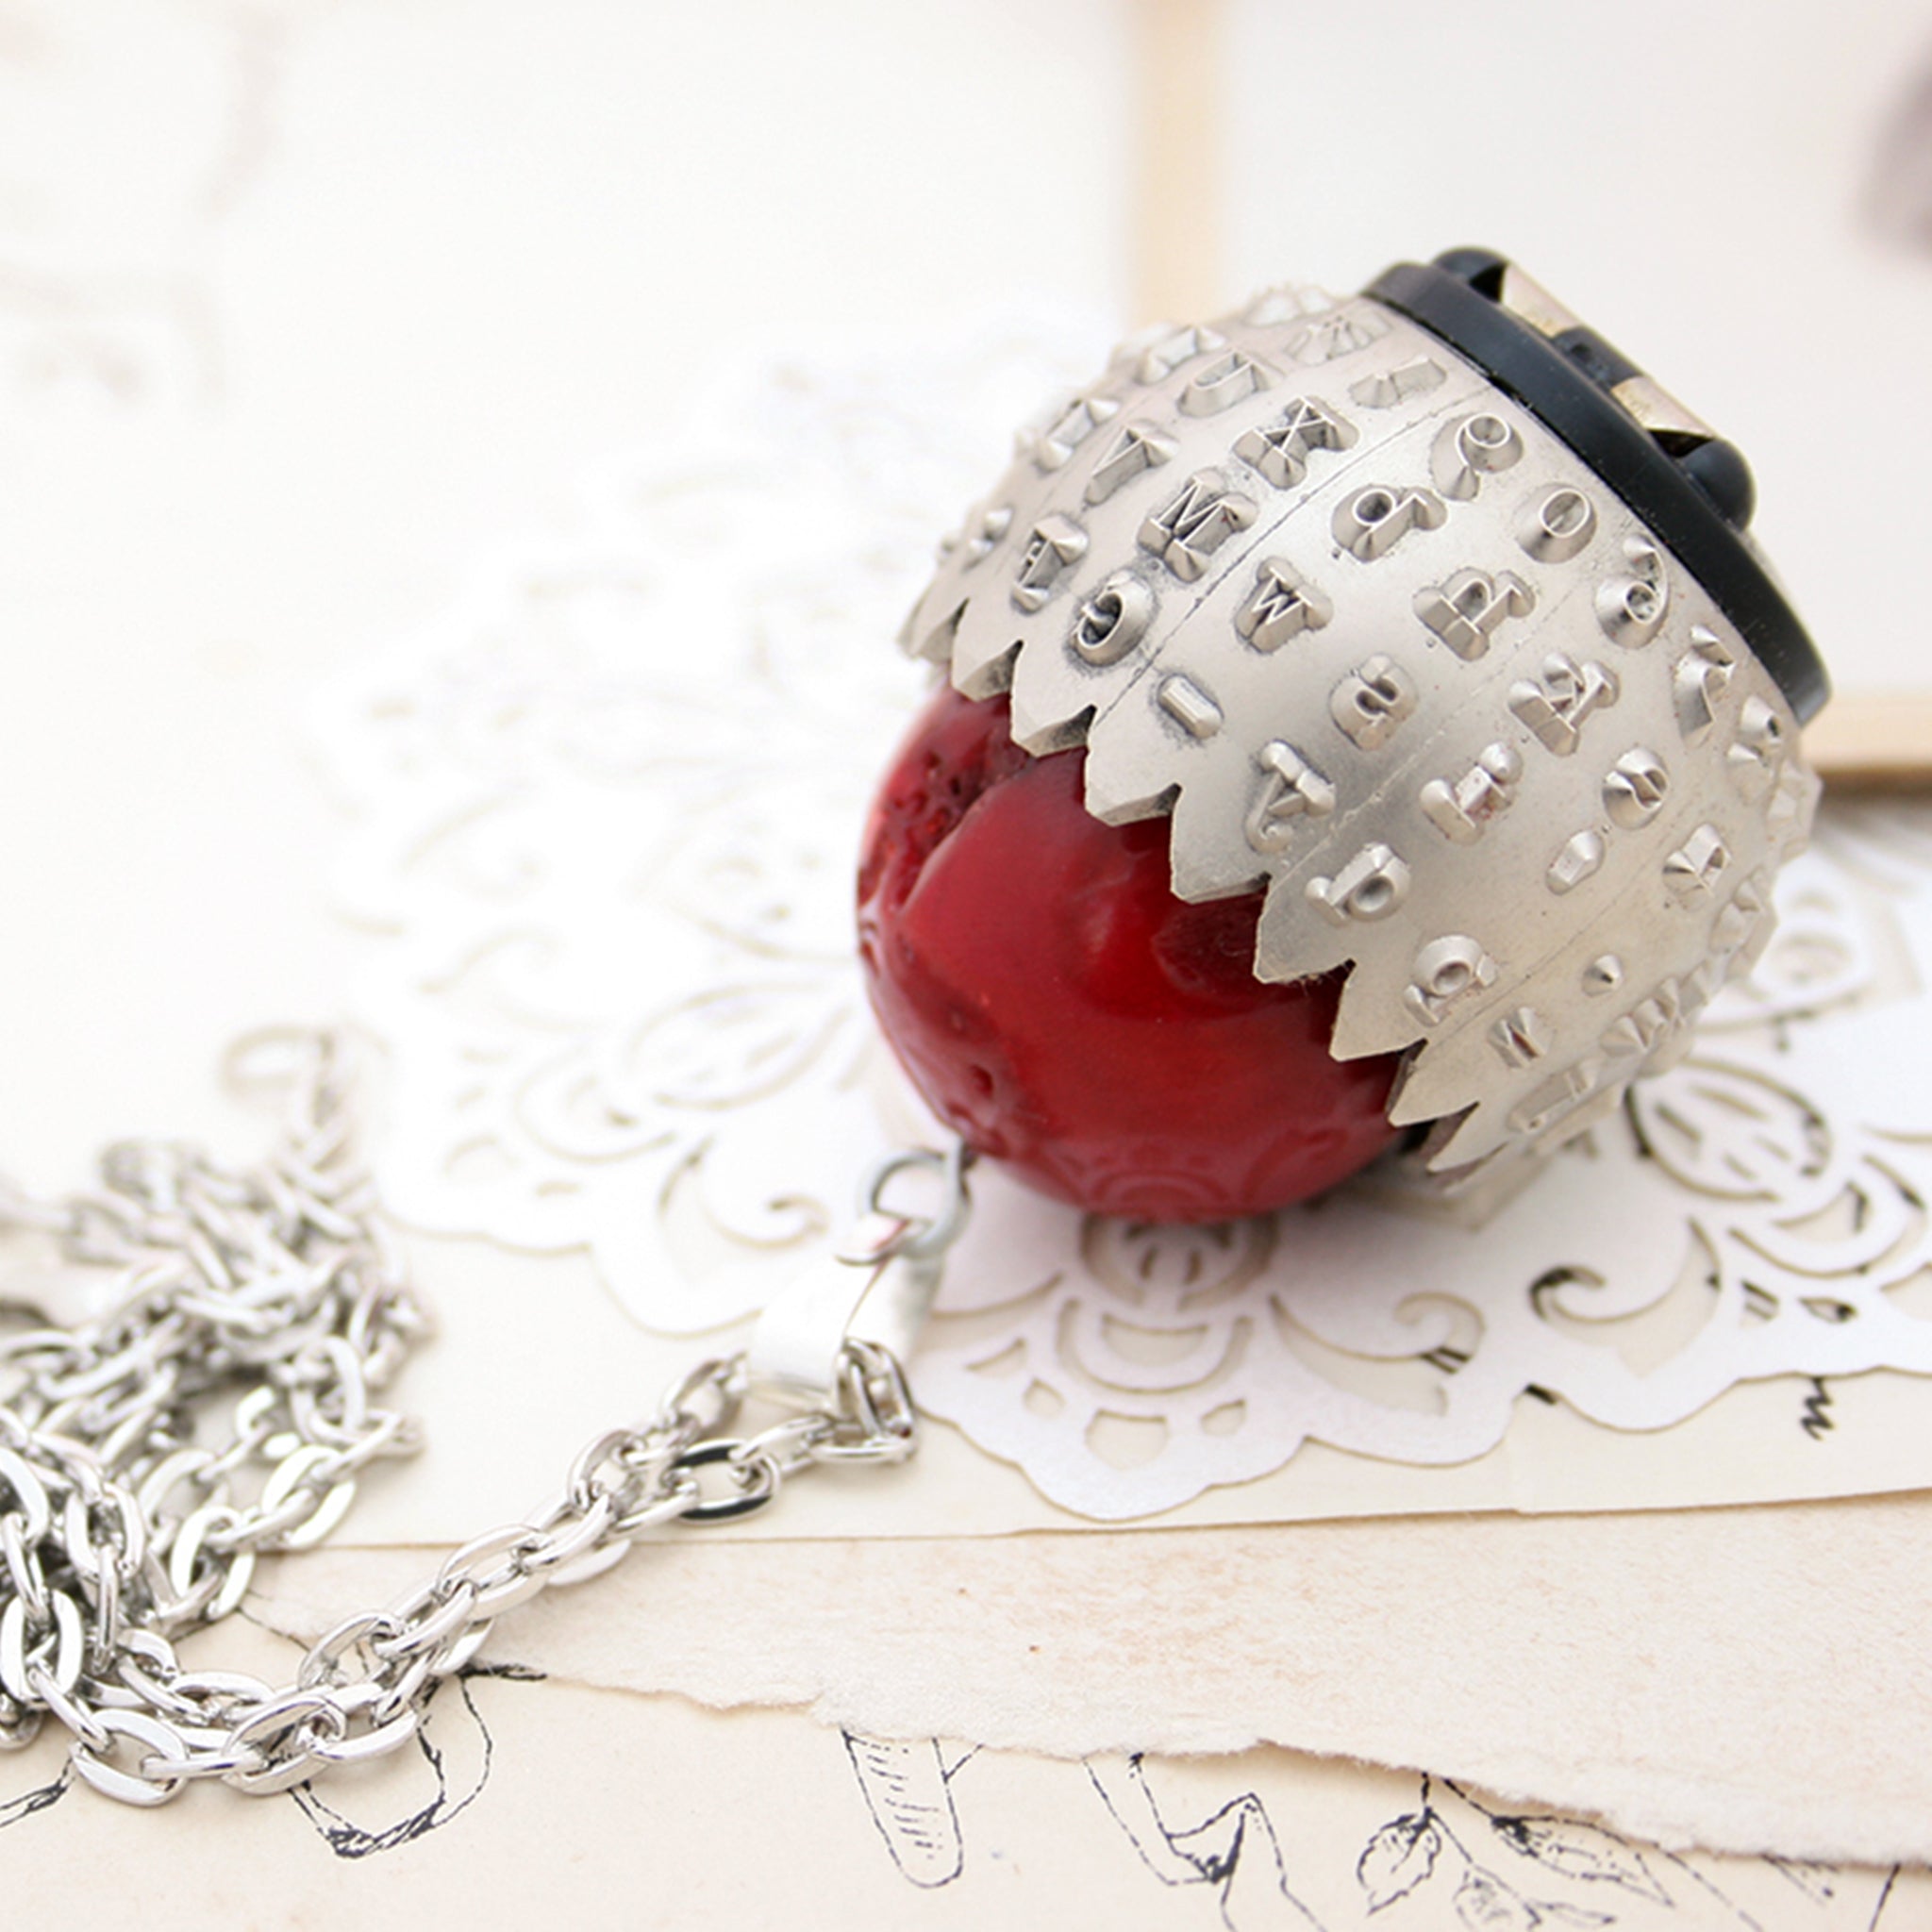 IBM Selectric typewriter font ball with large coral bead turned into eye catching necklace